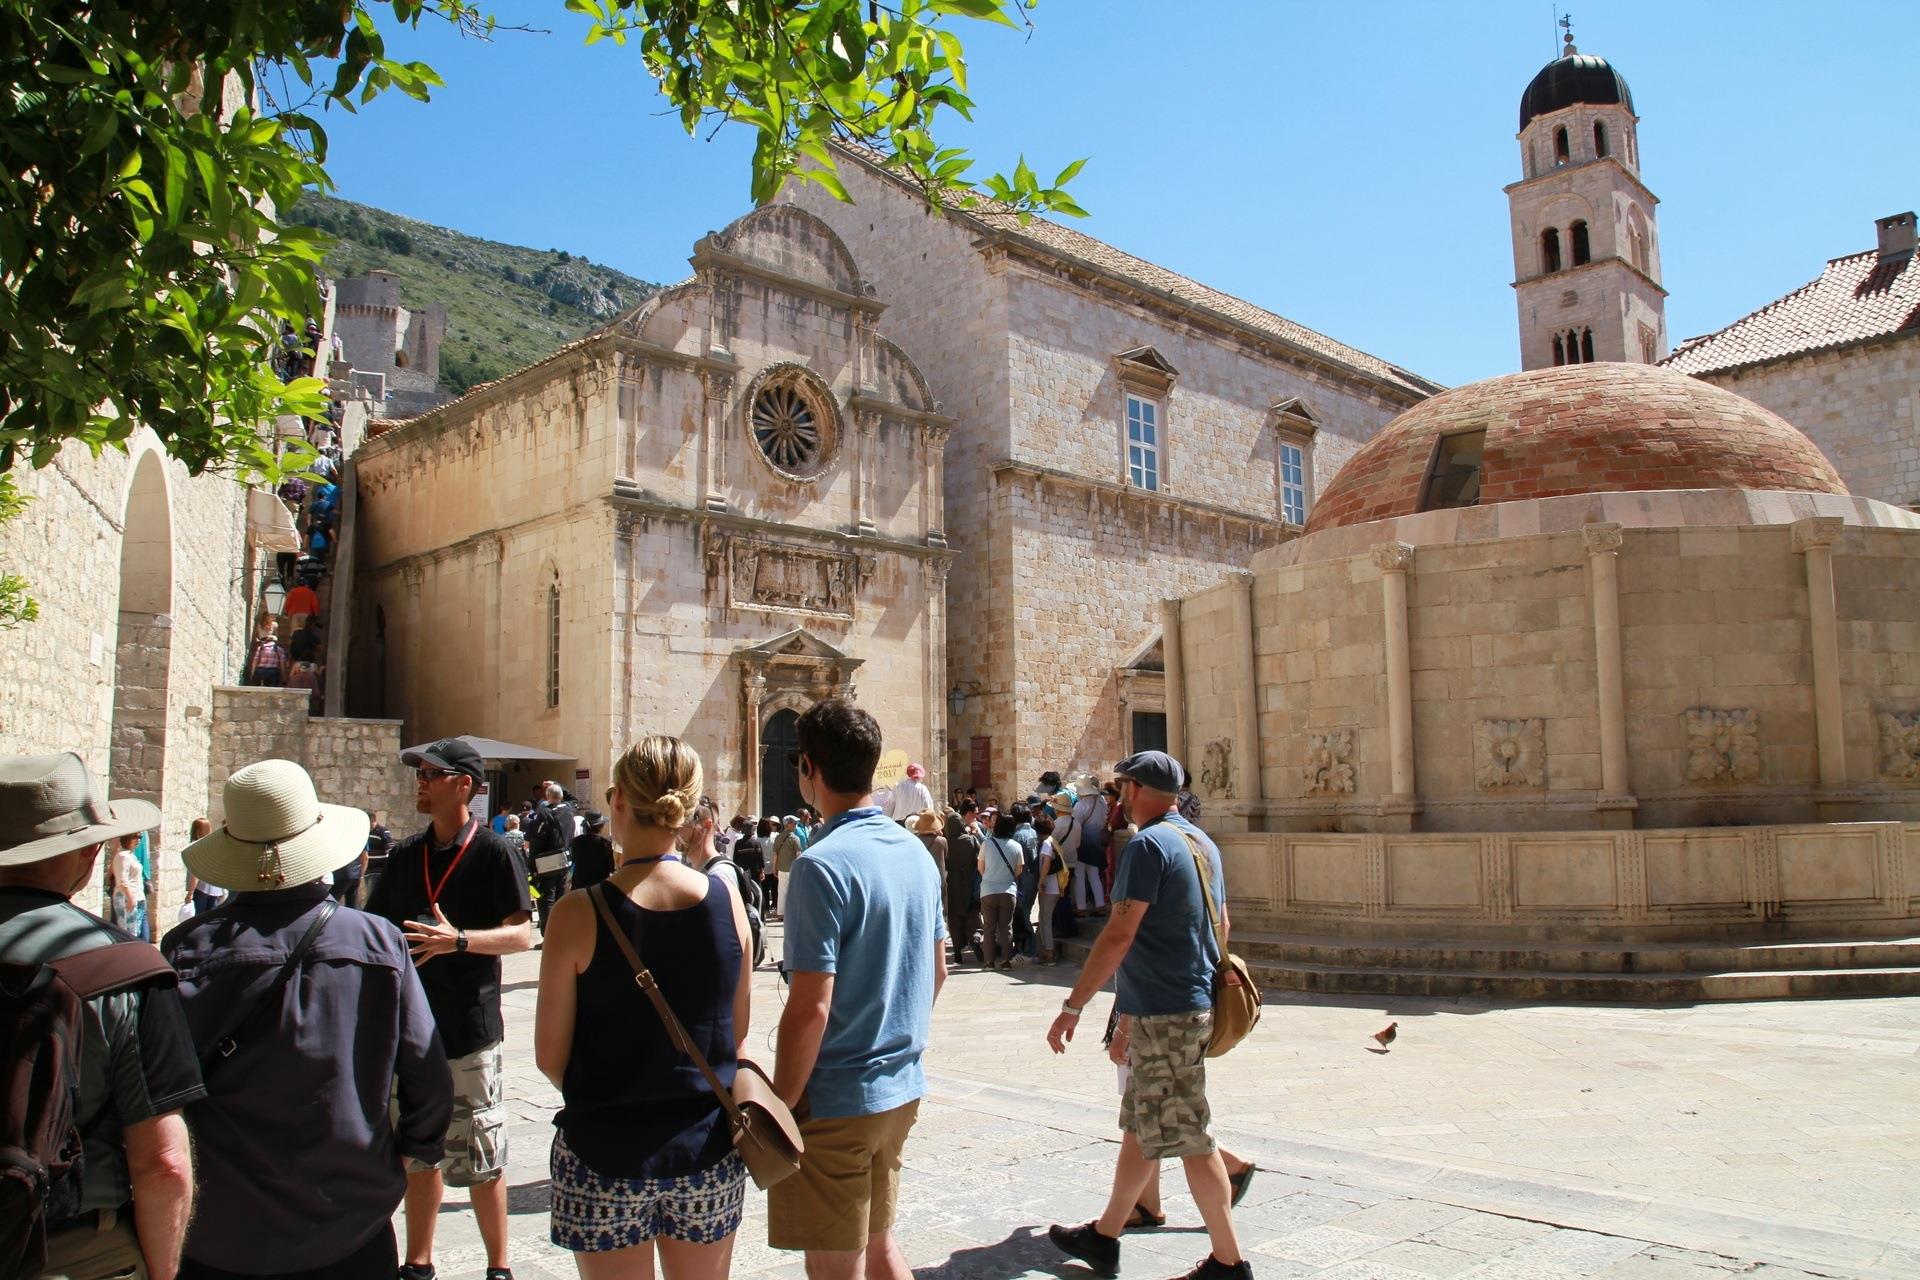 Dubrovnik Walking Tour: Discover the Old Town